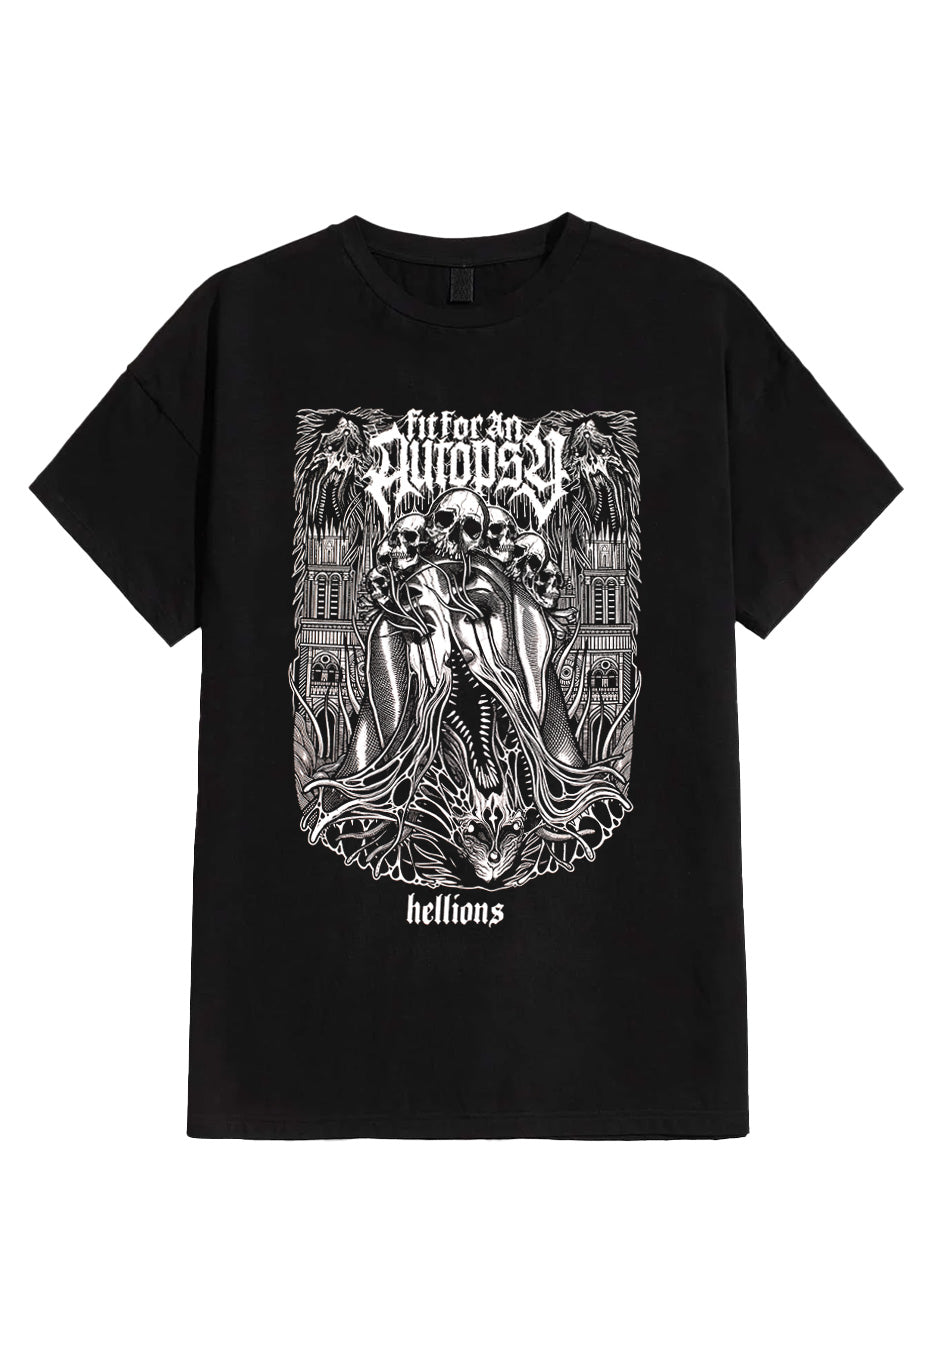 Fit For An Autopsy - Hellions - T-Shirt